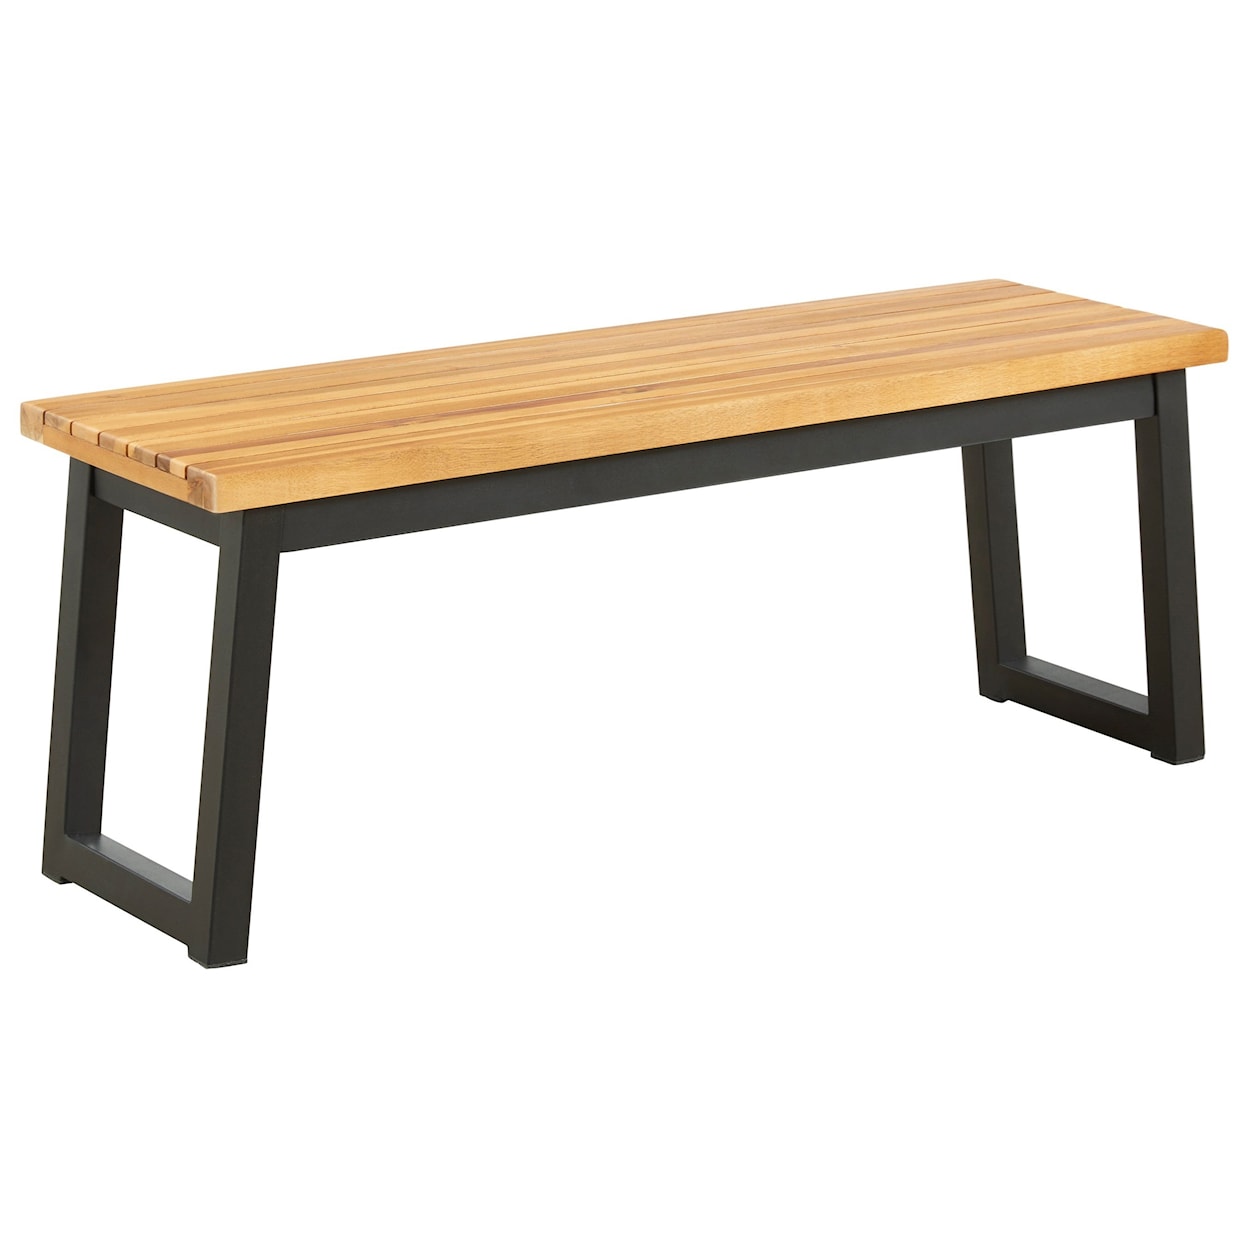 Signature Design Town Wood Dining Table Set